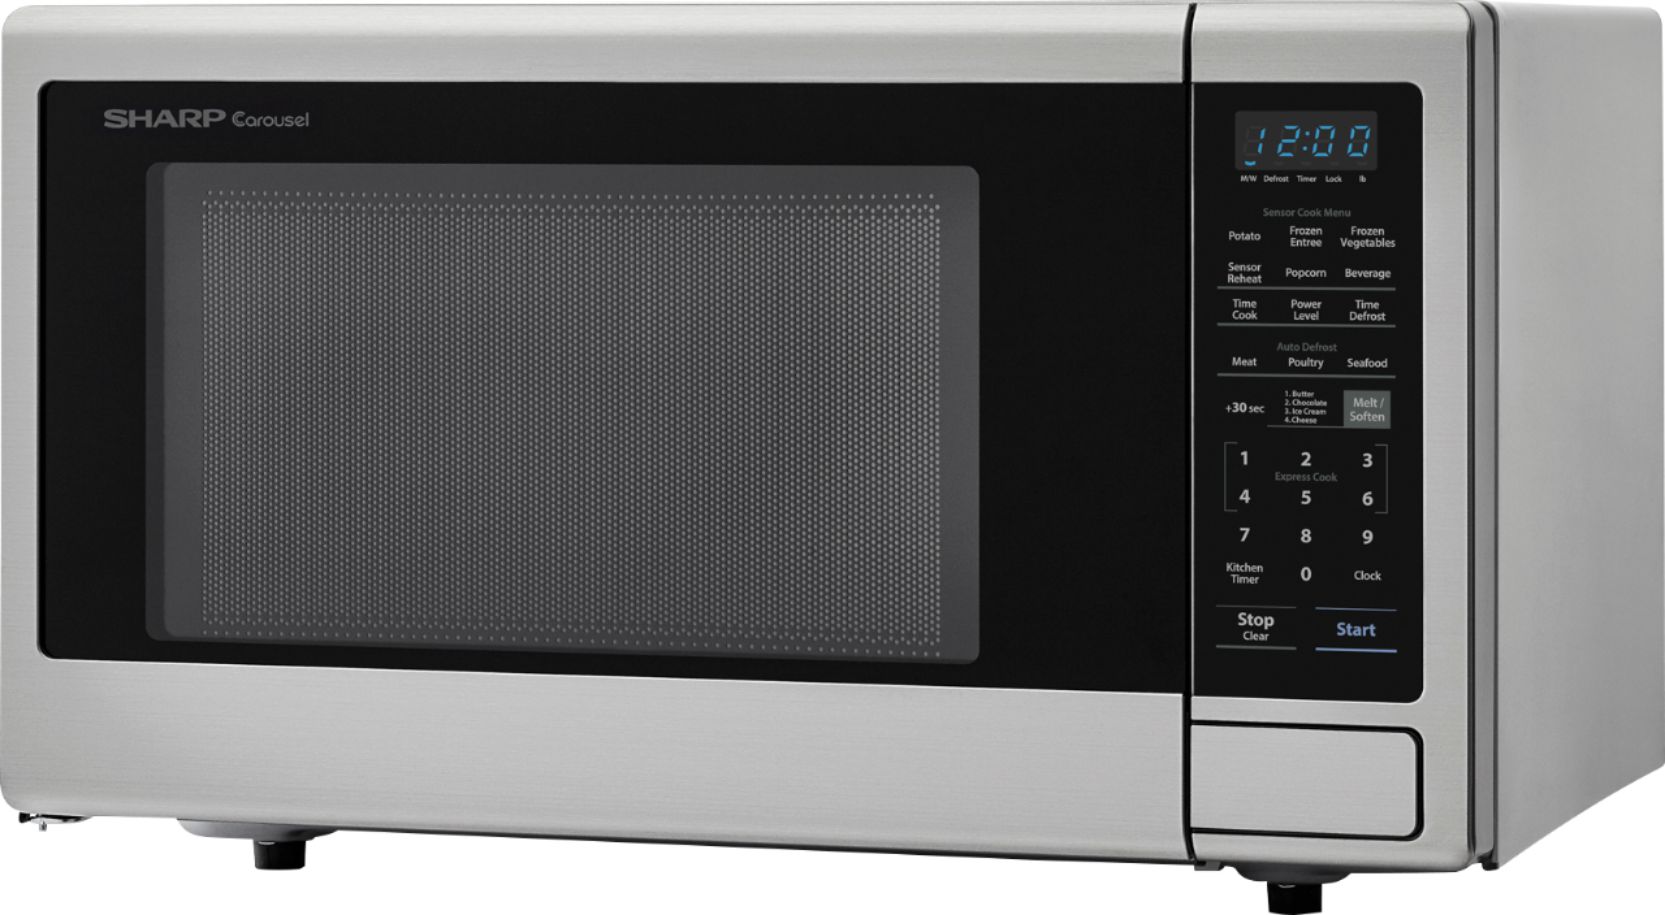 Sharp - Carousel 2.2 Cu. Ft. Microwave with Sensor Cooking - Stainless